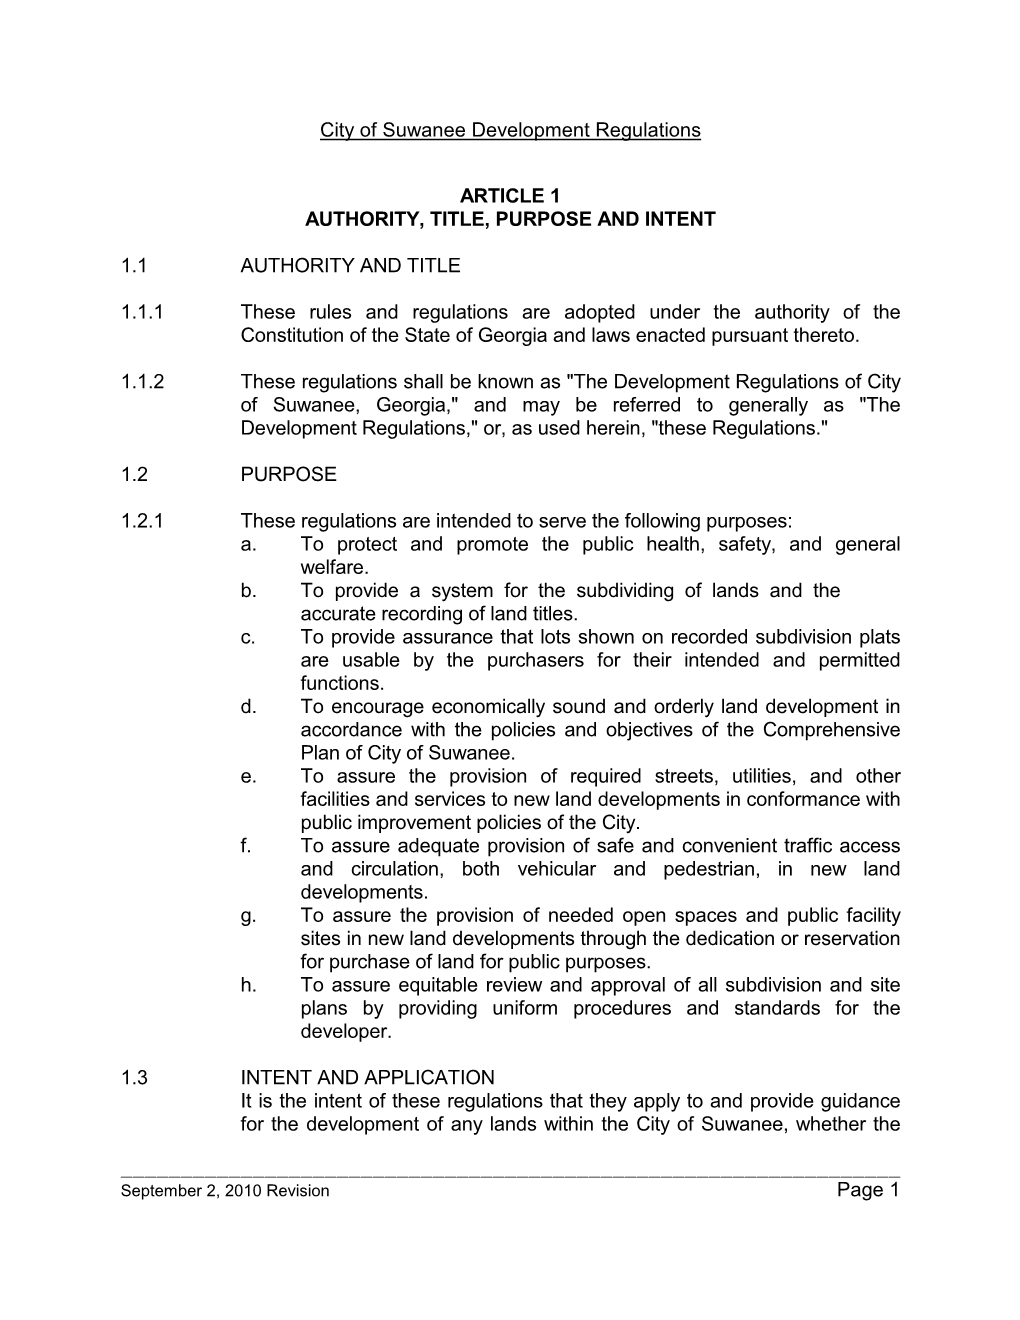 Article 1 Authority, Title, Purpose and Intent